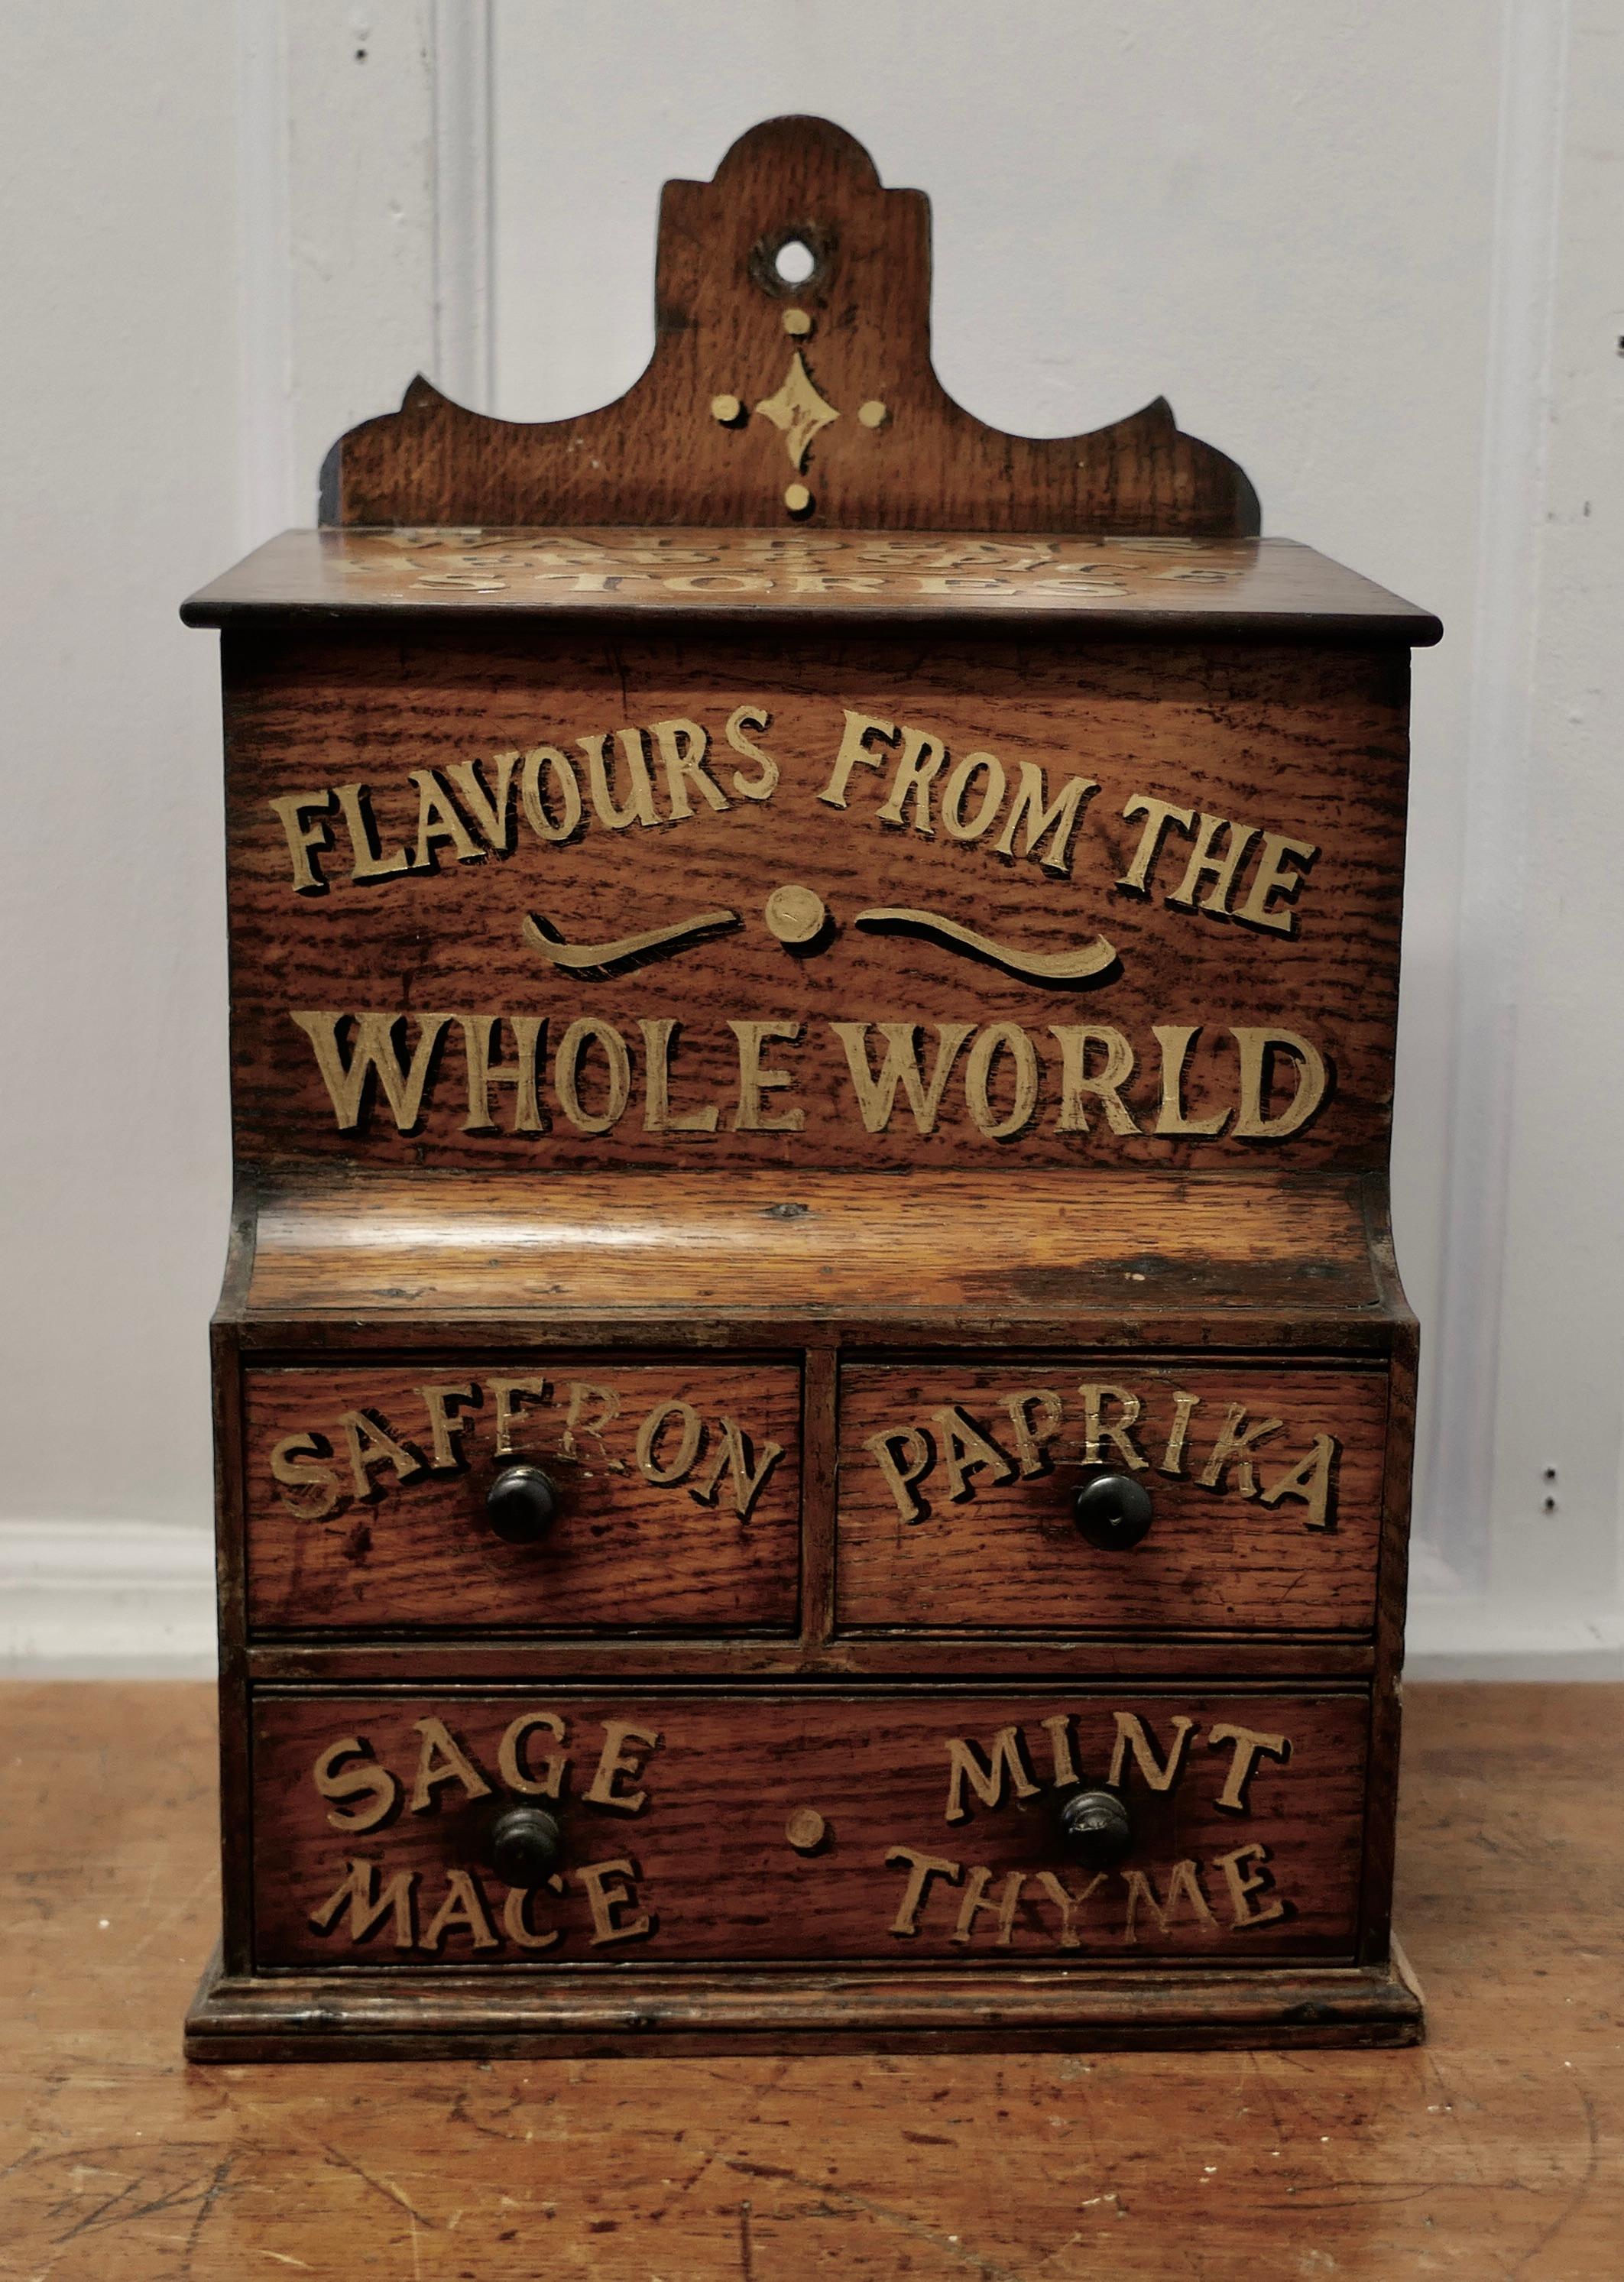 Arts and Crafts Wall Hanging Salt Box with Spice Drawers

A lovely piece in Golden Oak it is a wall hung piece with a large salt box at the top with 3 labeled Herb and Spice drawers below
A superb and useful Spice Cabinet for your kitchen
The